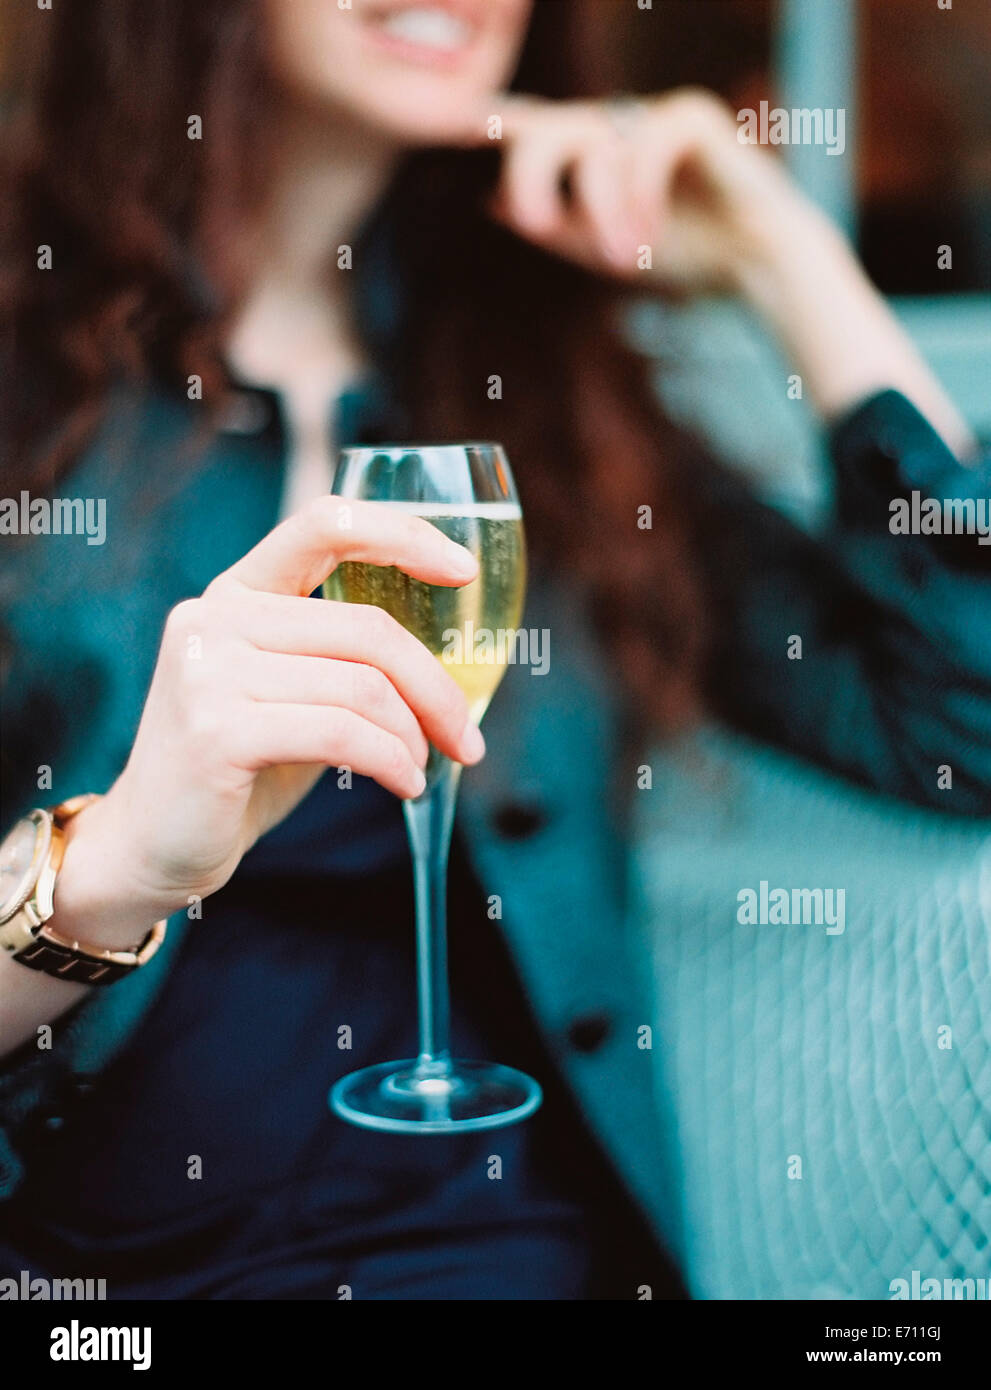 A woman holding a glass of white wine with a long stem. Stock Photo